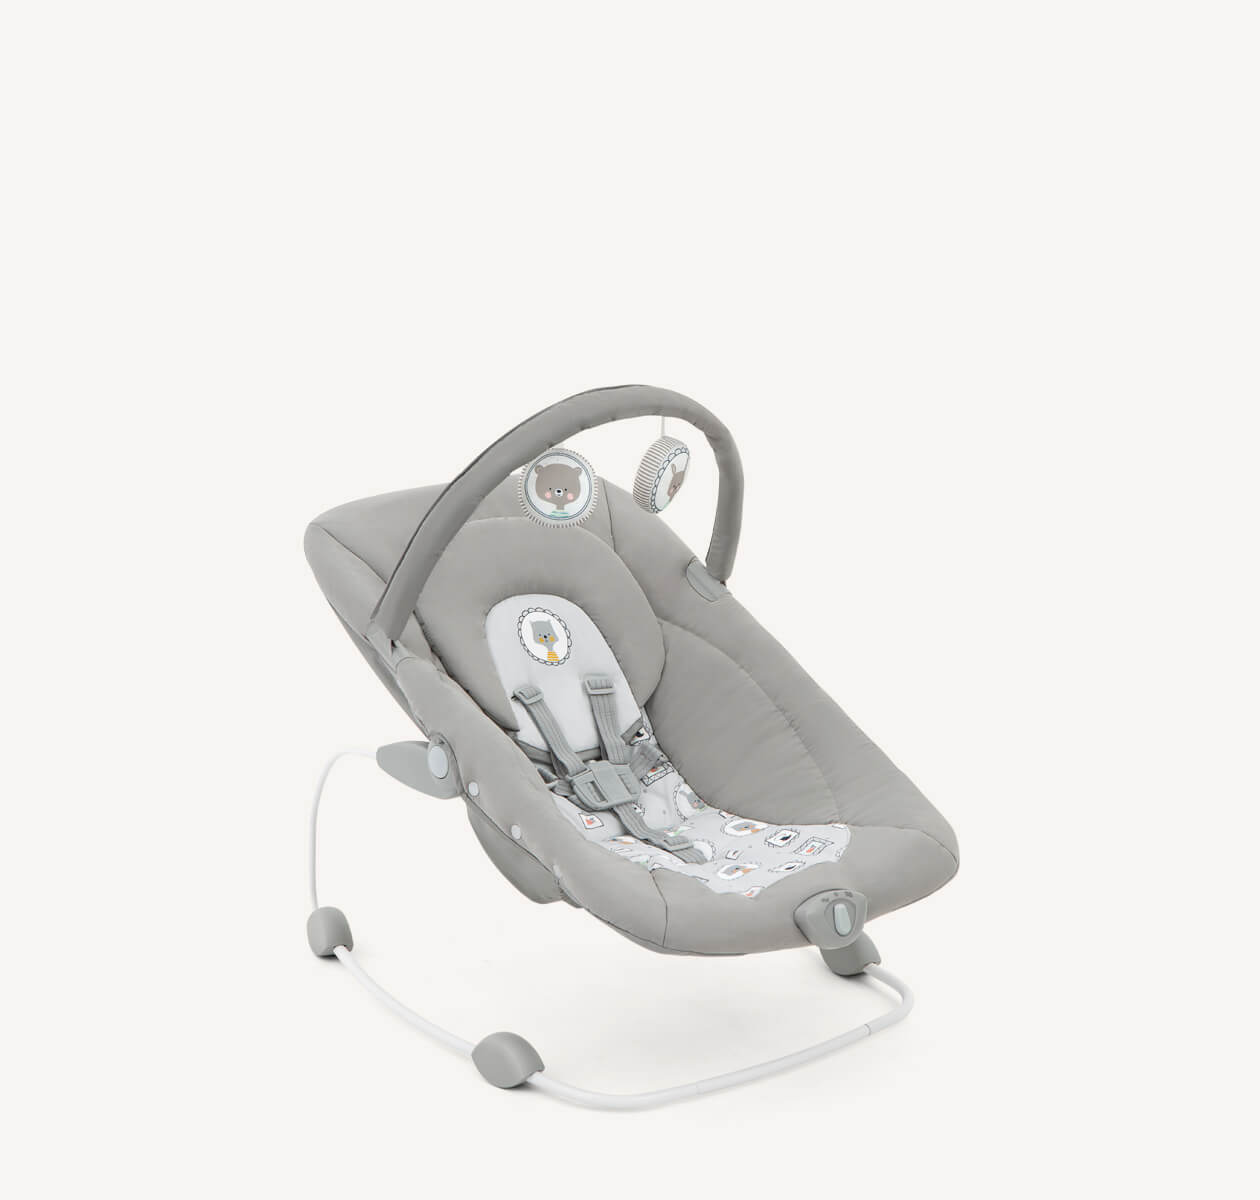 Joie wish™ compact baby bouncer